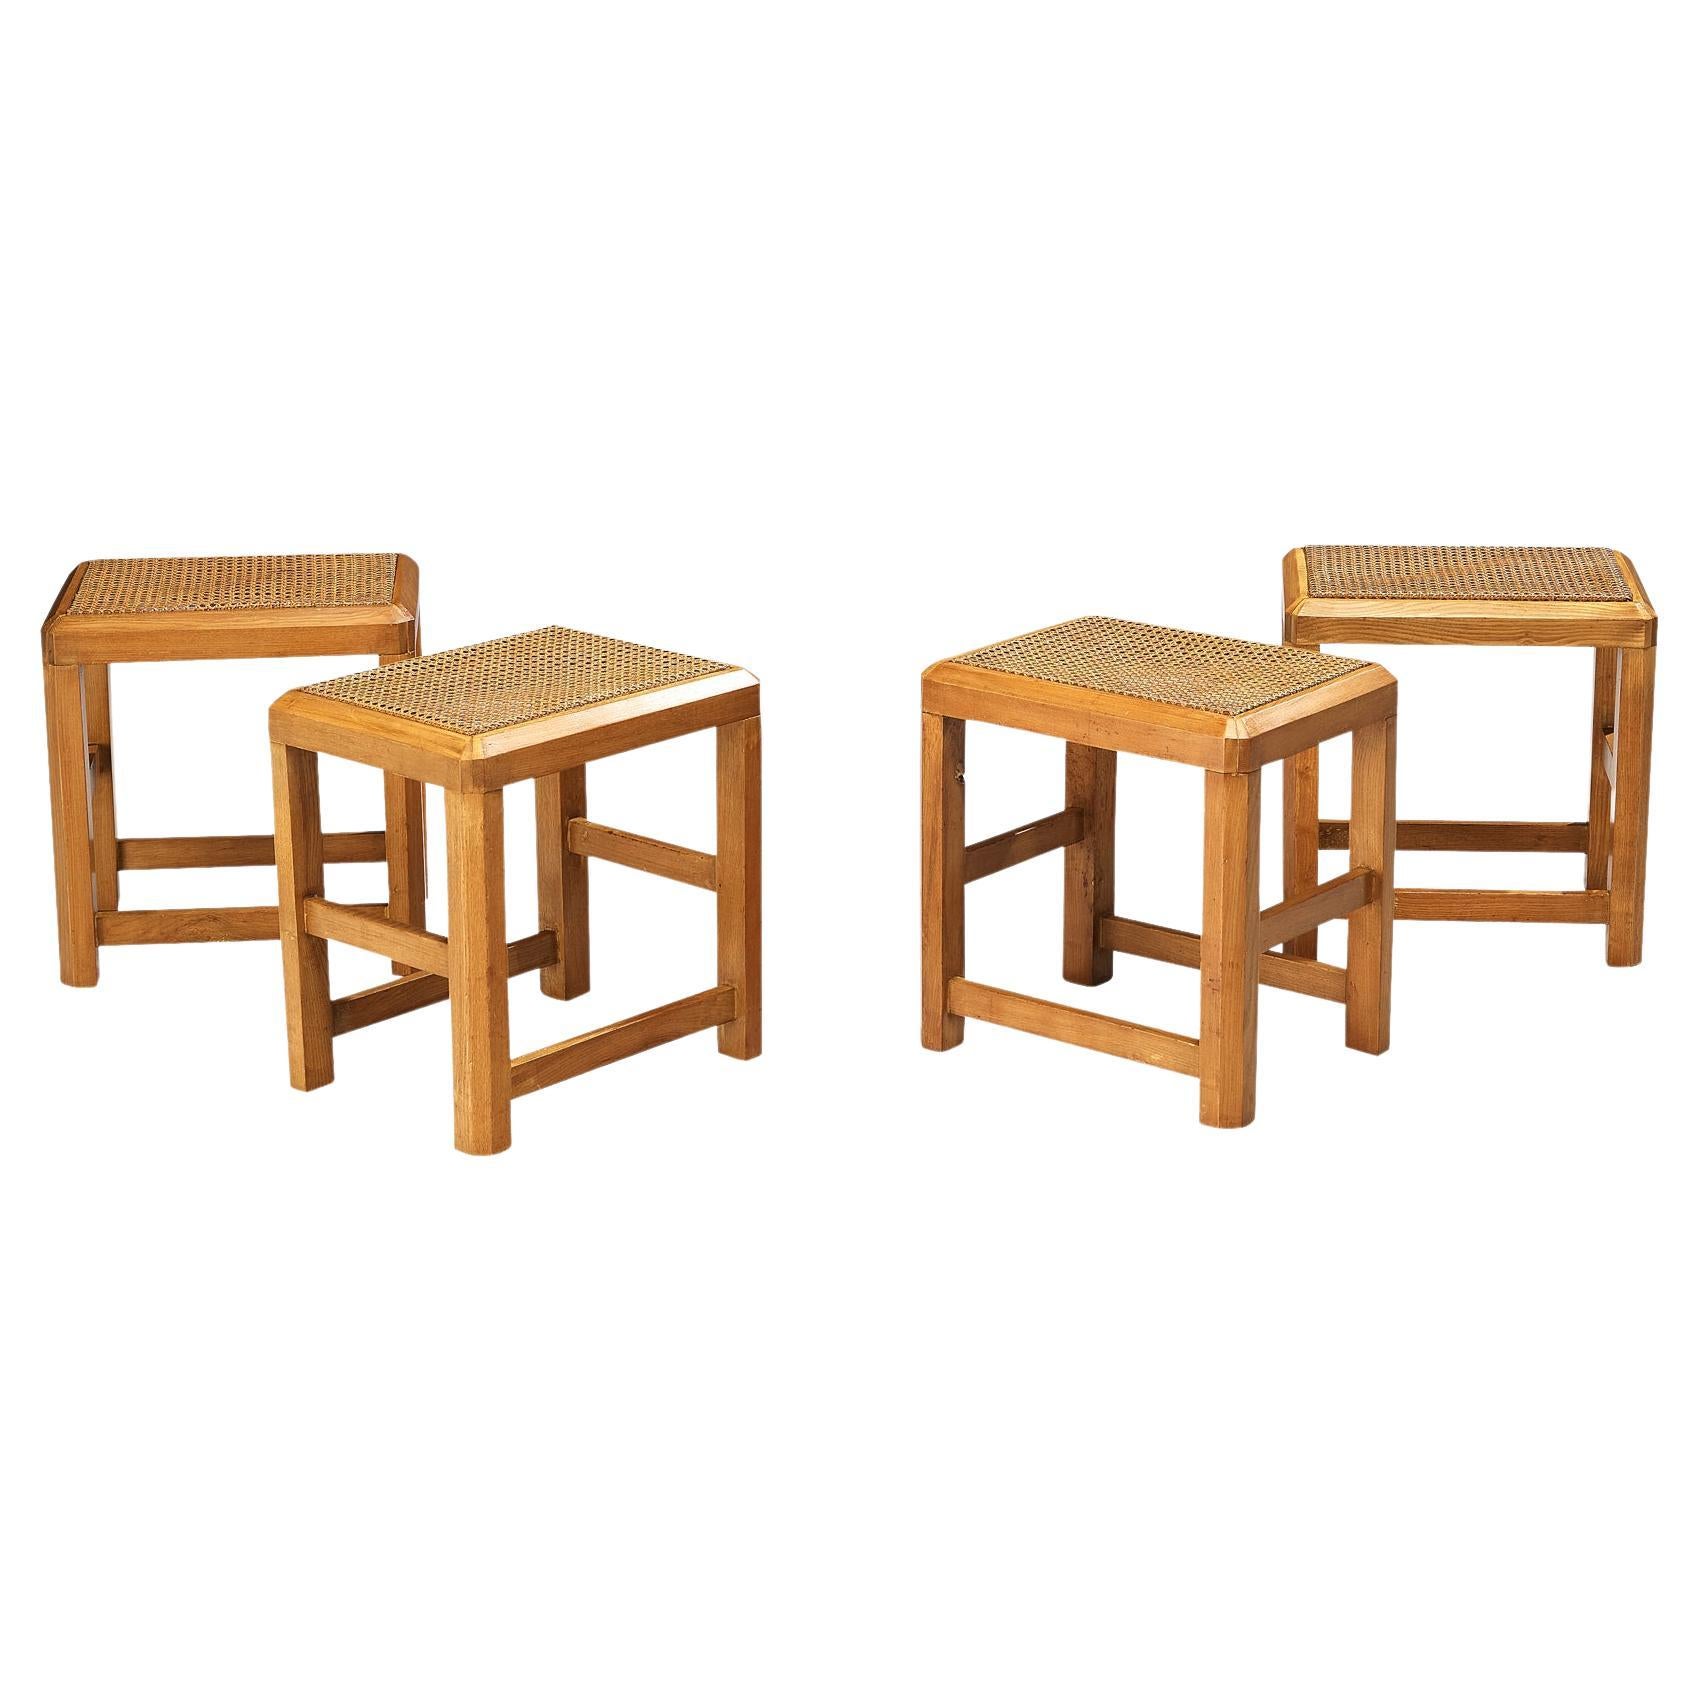 Italian Set of Four Stools in Cane and Wood